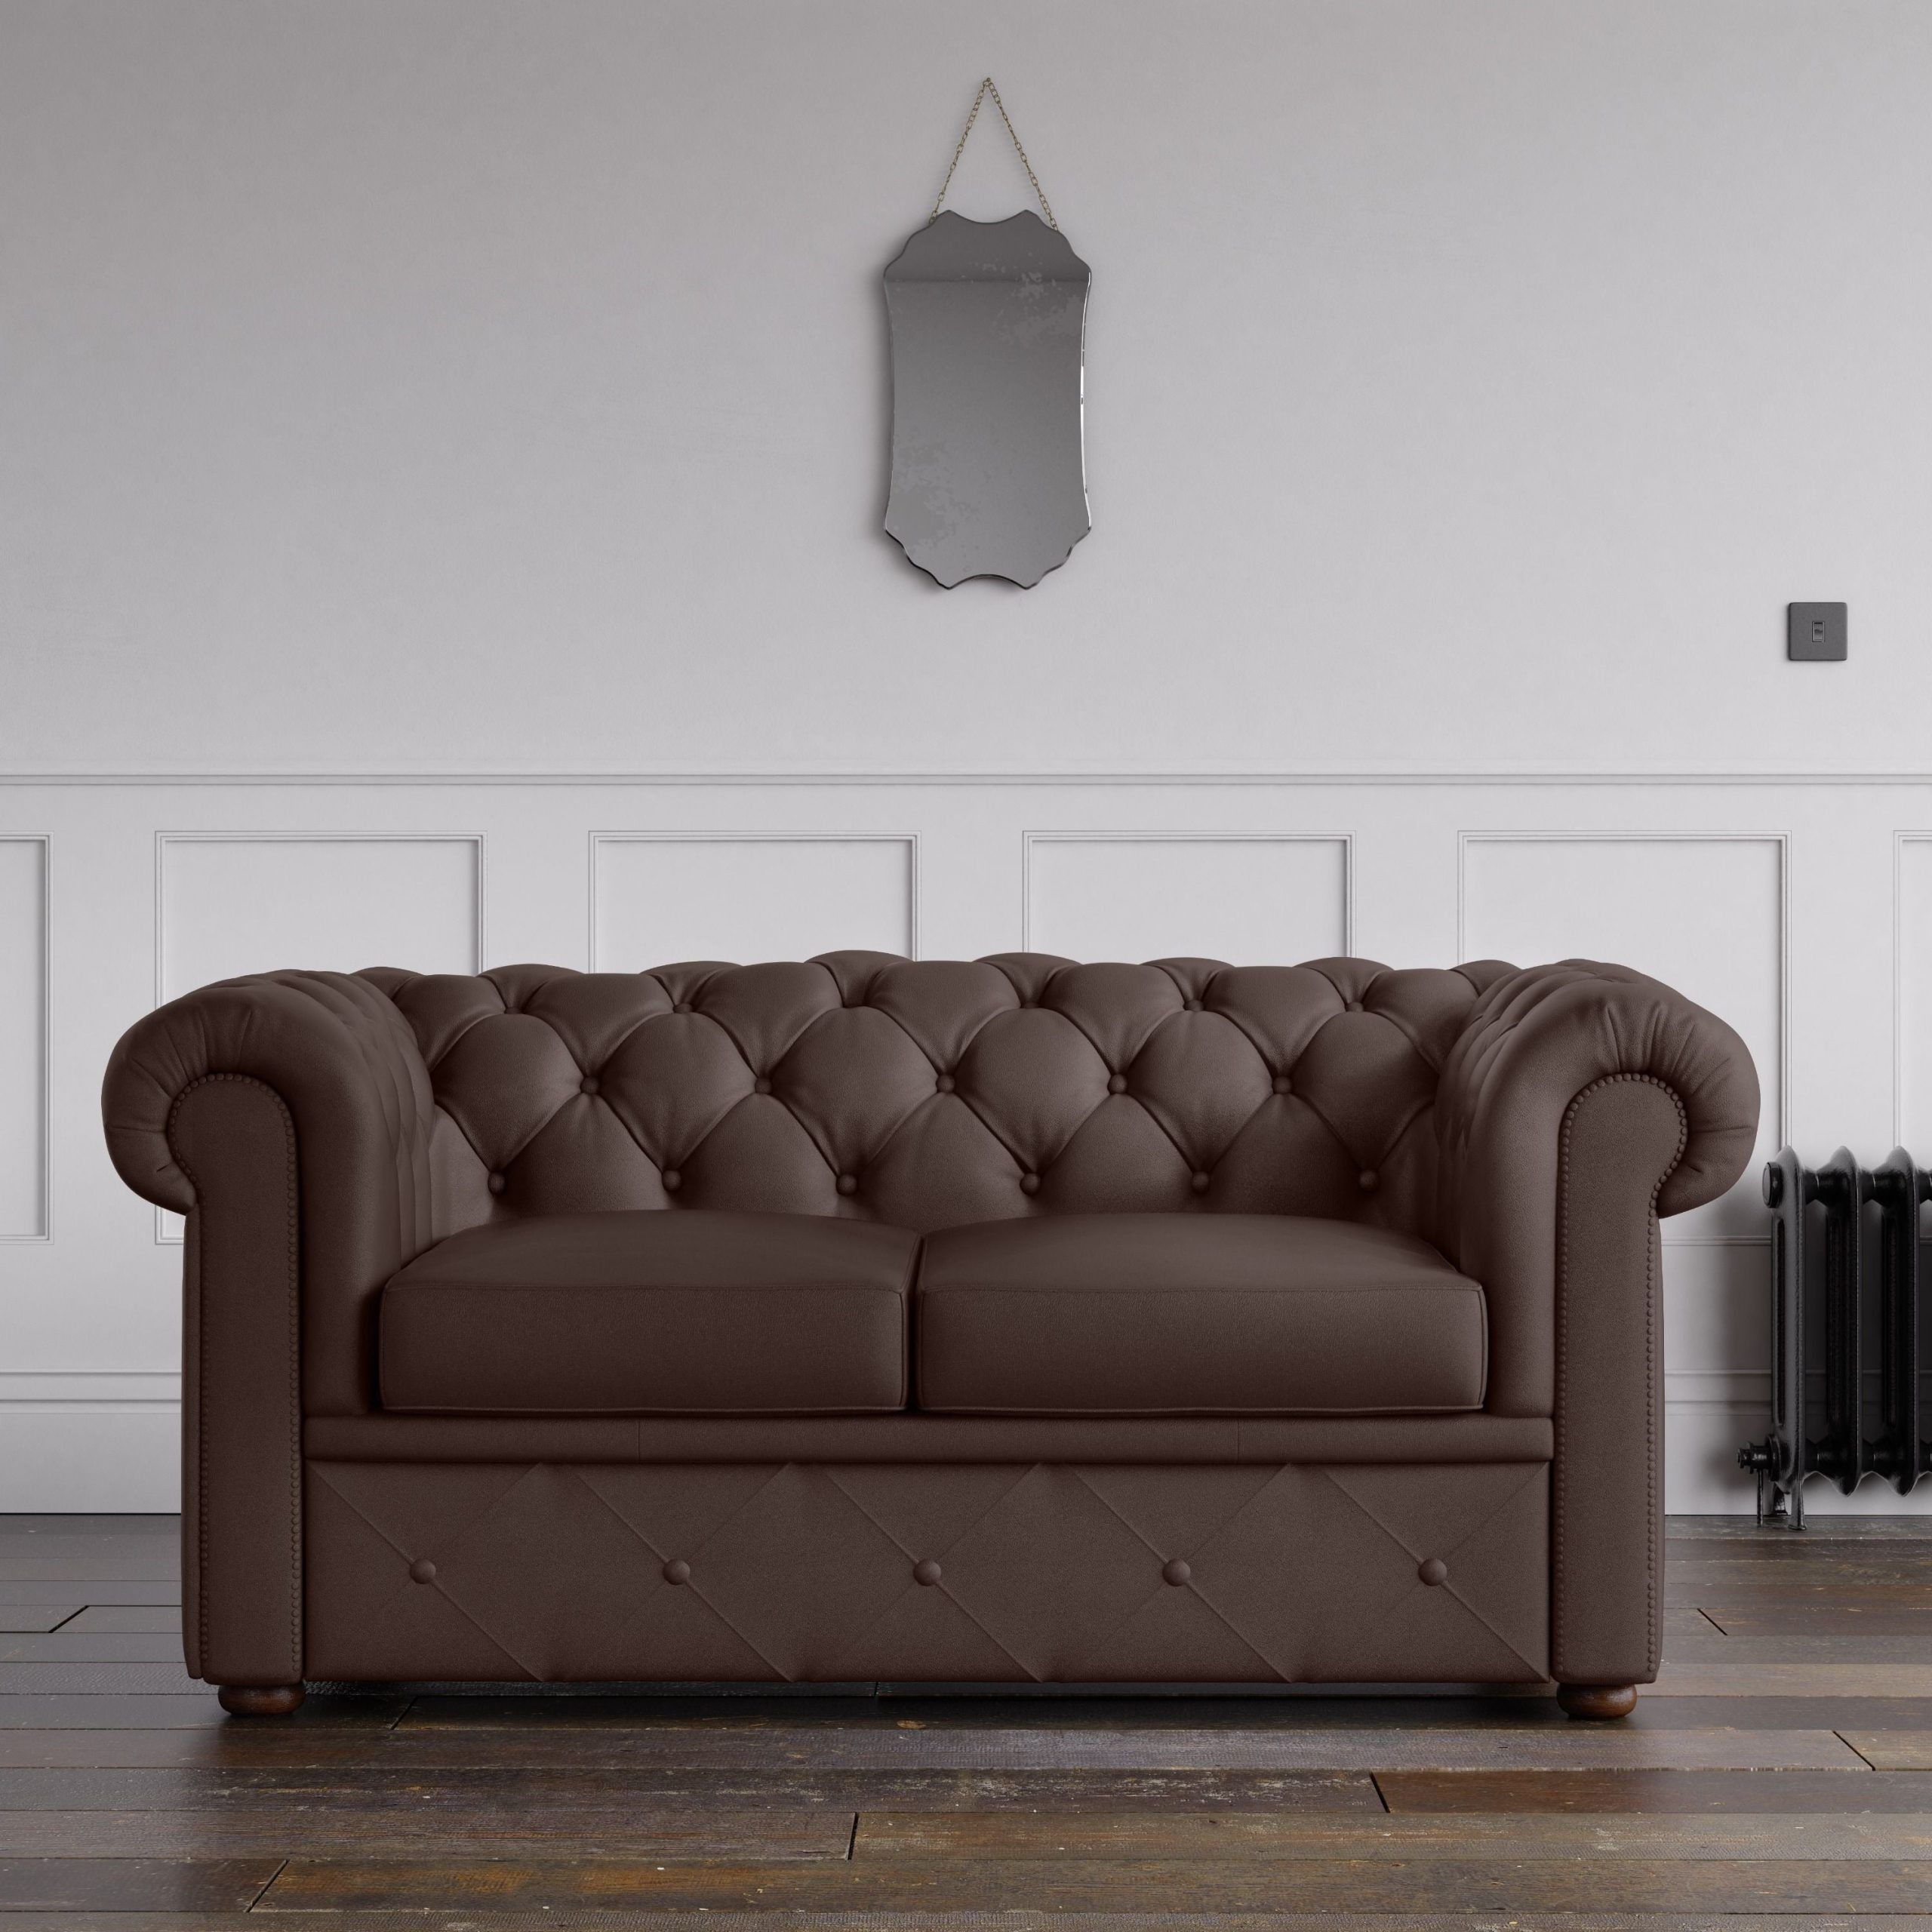 Recent Chesterfield Faux Leather Sofa Chocolate – Endure Fabrics With Faux Leather Sofas In Chocolate Brown (View 4 of 15)